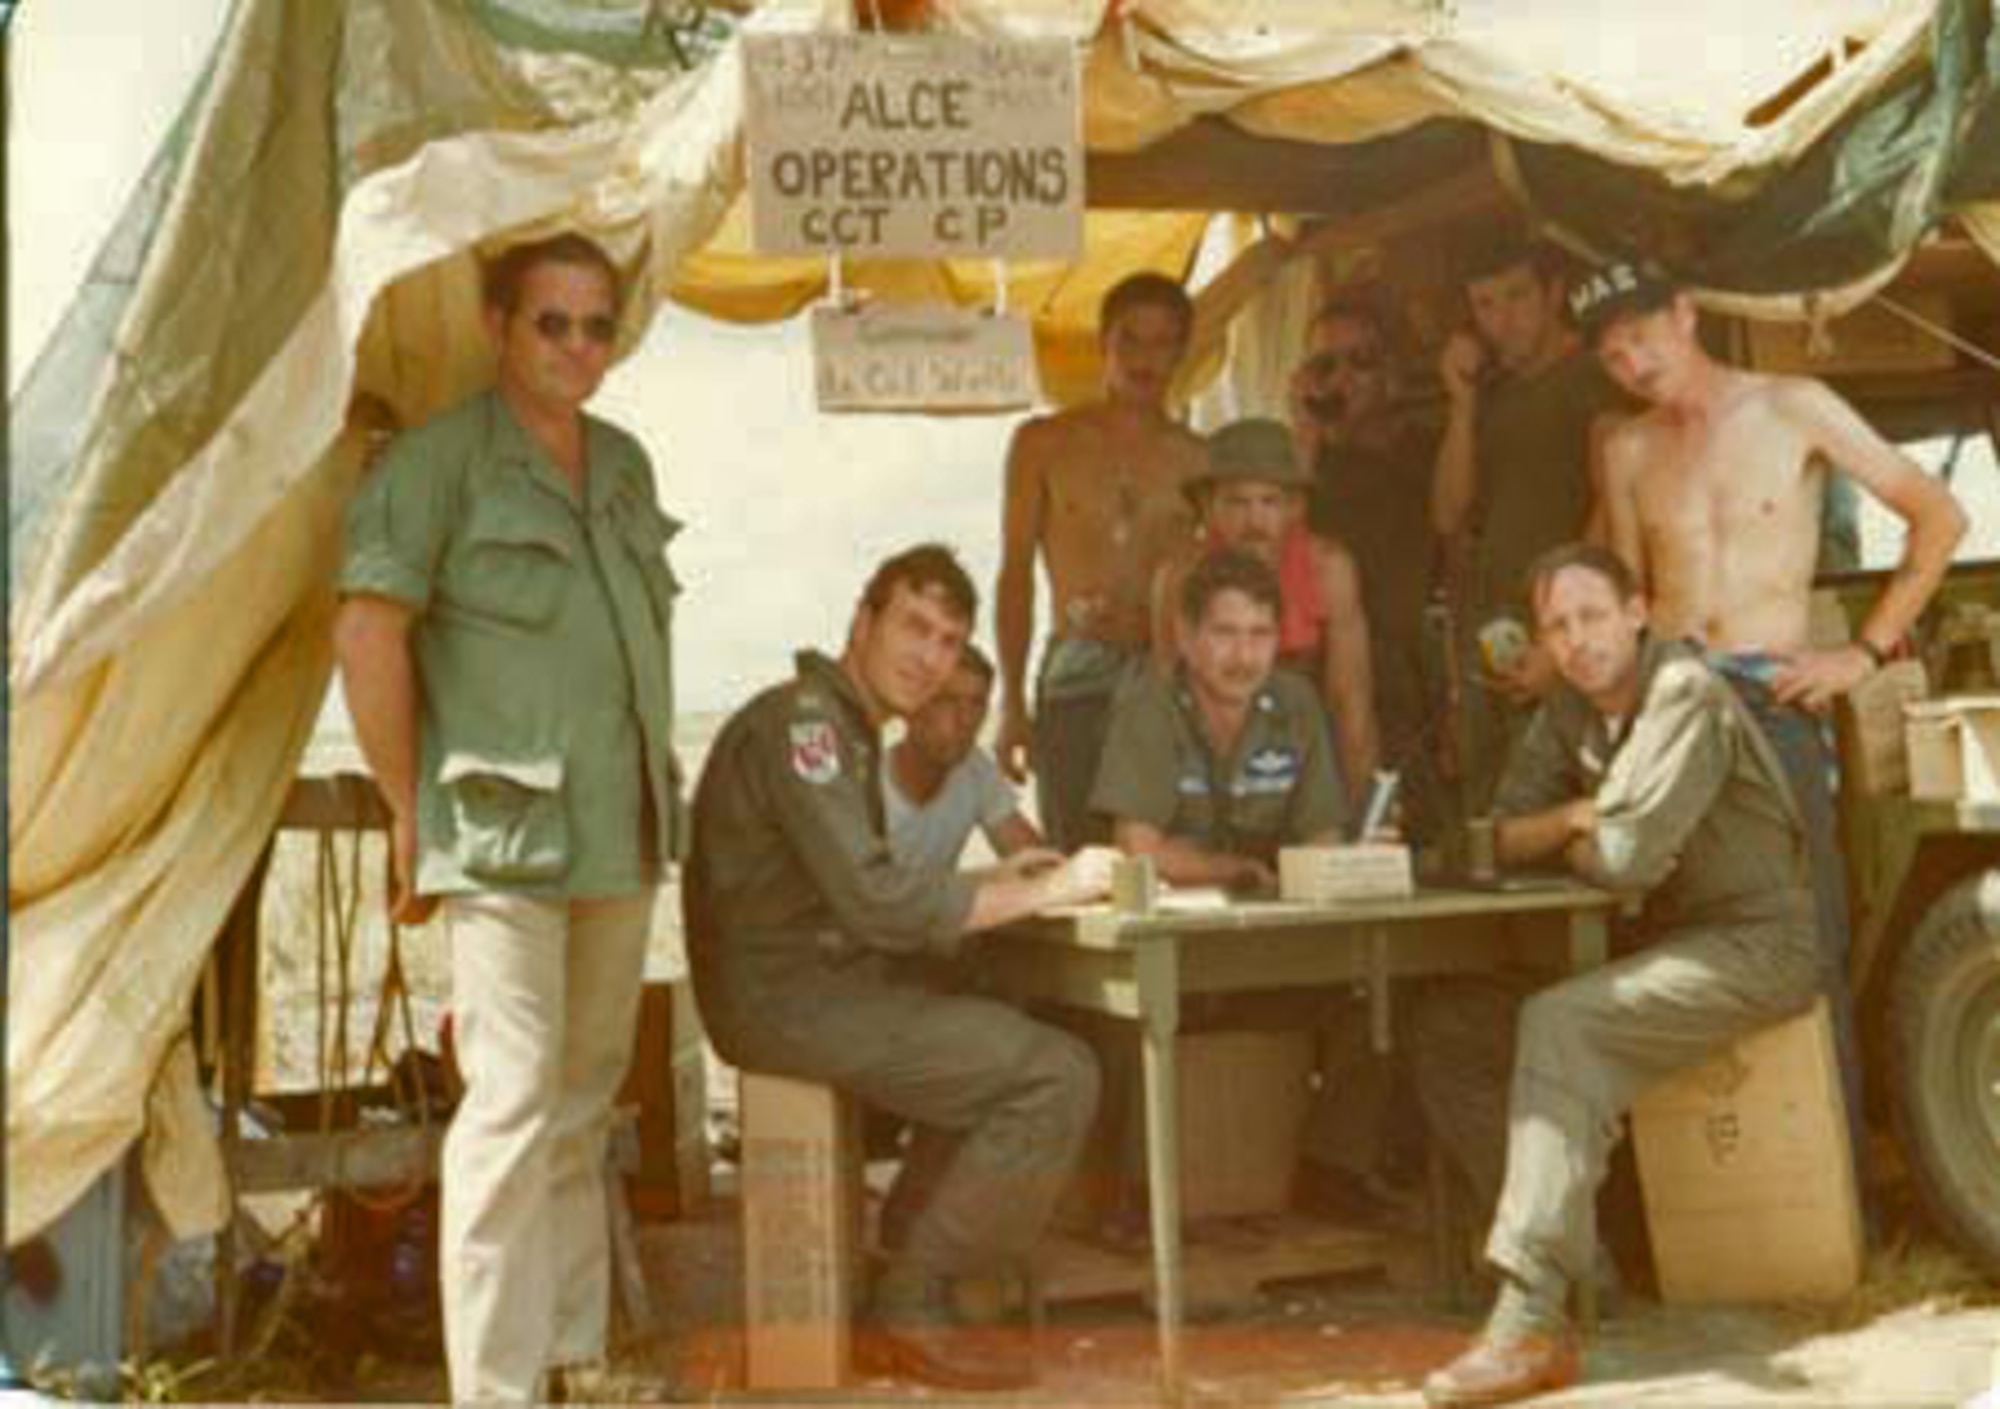 In an operation that began on November 18, 1978, the 31st Aeromedical Evacuation Squadron participated in the treatment and evacuation of personnel from Georgetown, Guyana. These survivors were victims of a mass suicide that had occurred at Jonestown, Guyana on the same date. (Air Force File Photo)